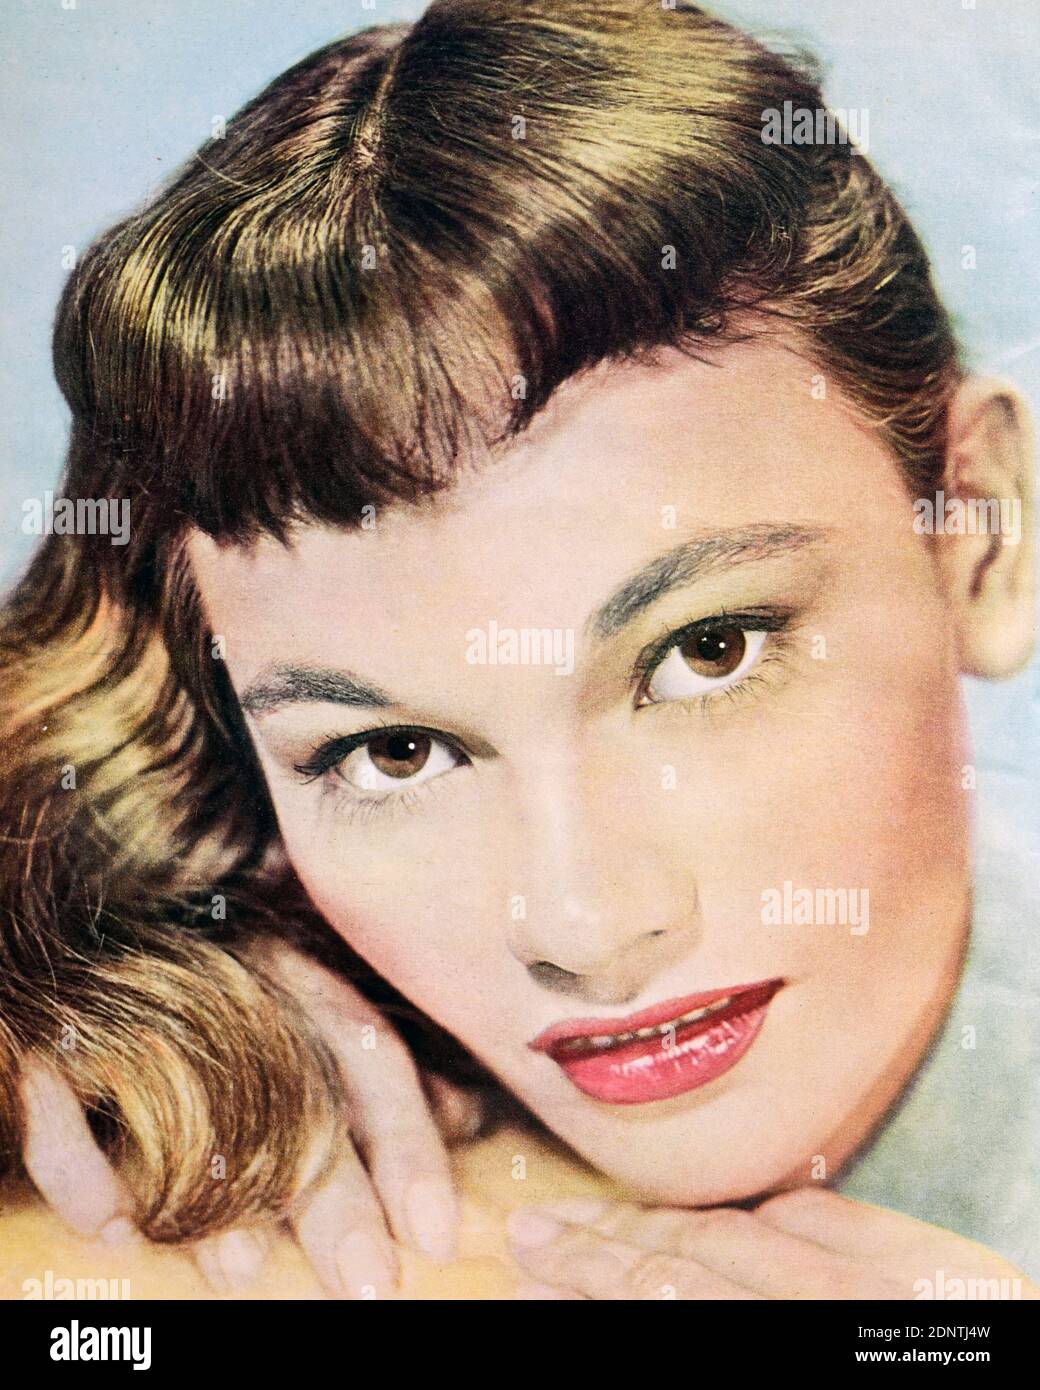 Photograph of Gloria Talbott (1931-2000) an American film and television actress. Stock Photo